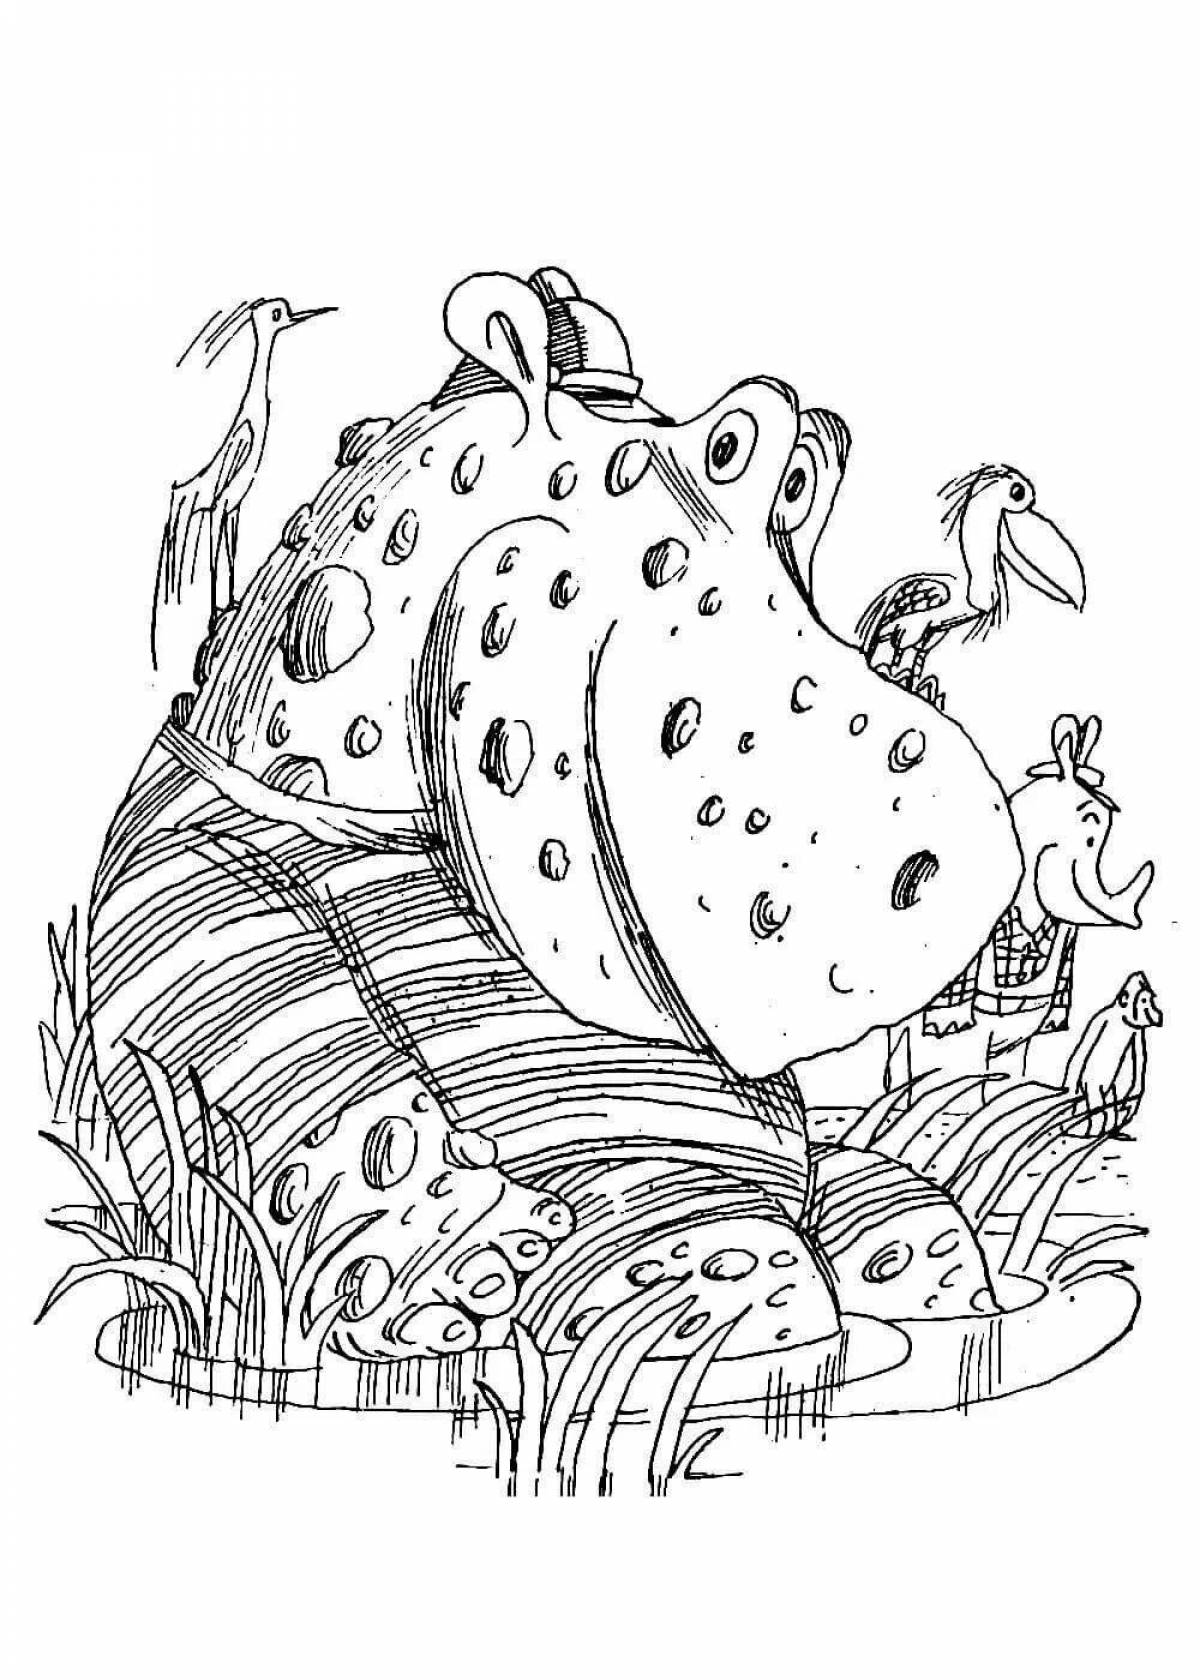 Fedorino gore cute coloring page